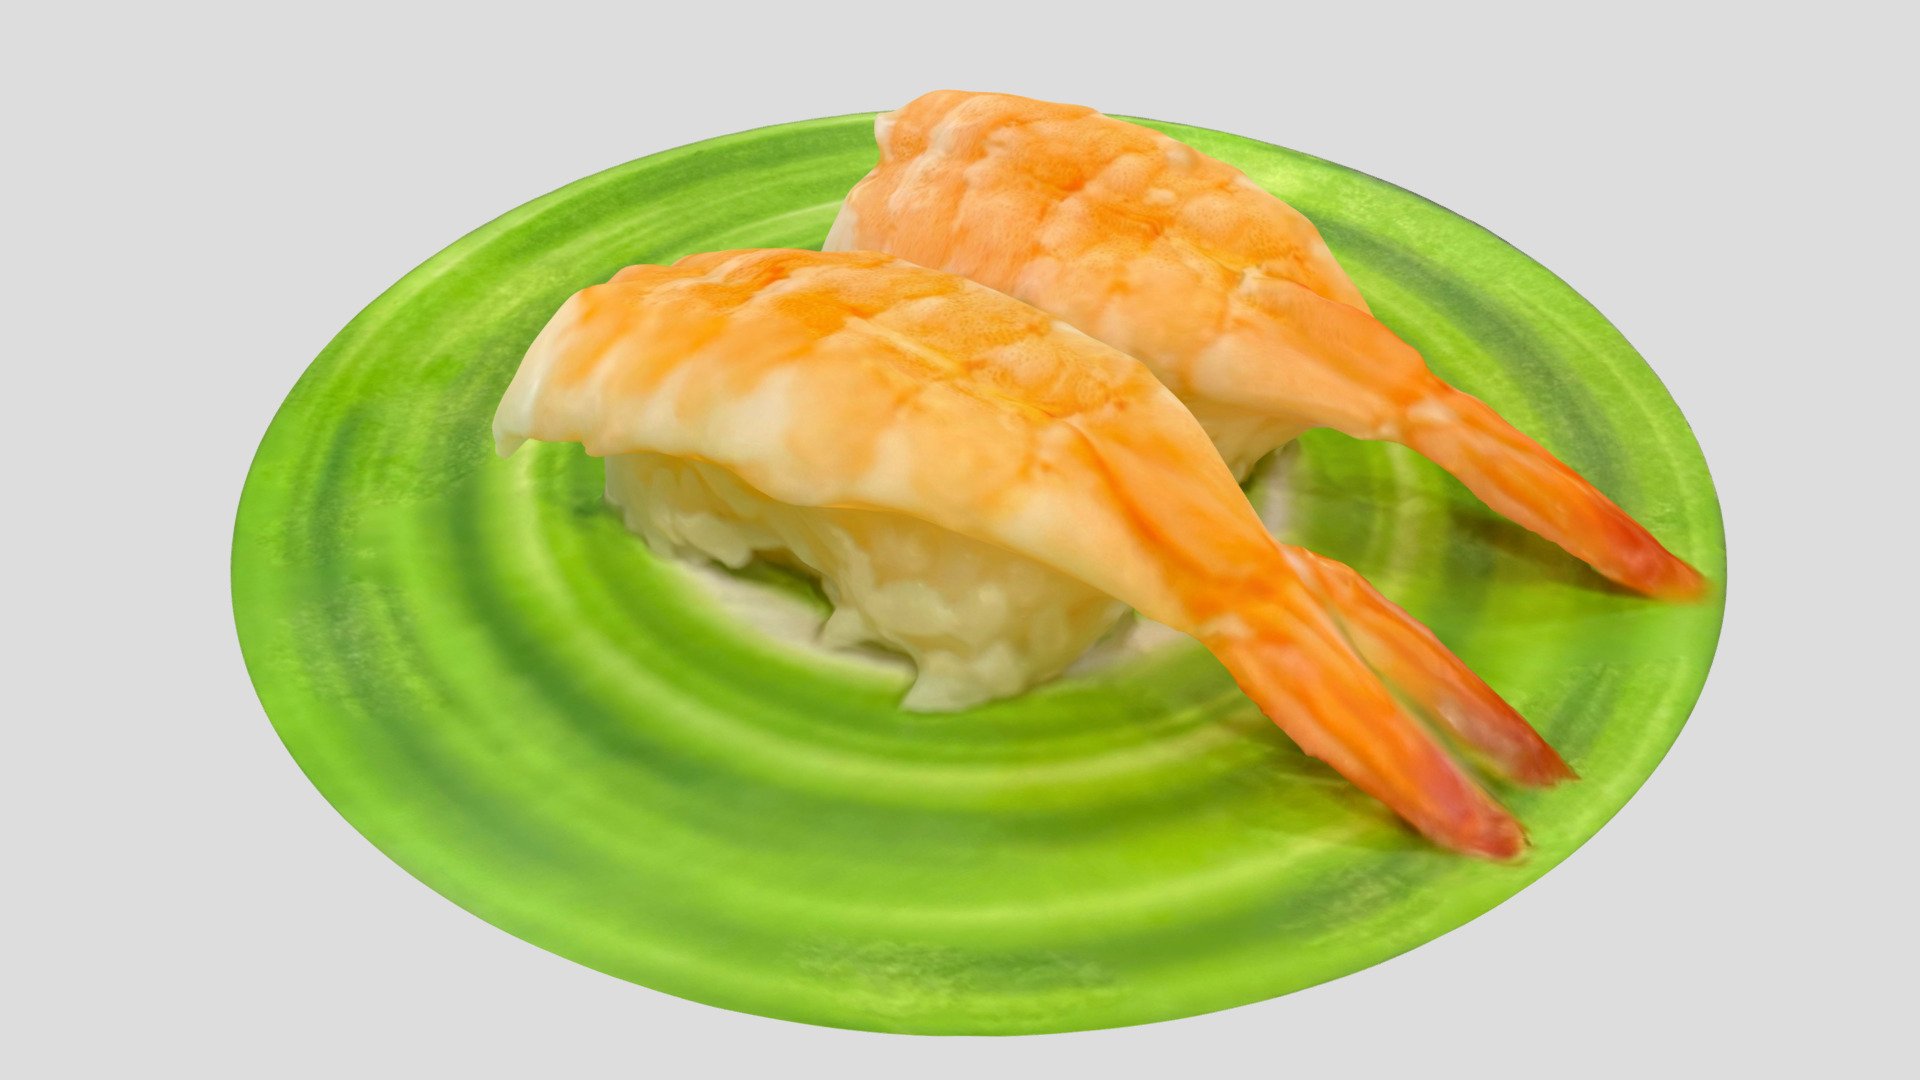 Shrimp sushi 3D model scanned using photogrammetry on an iphone. Fresh and straight from the ocean. Created with Polycam - Shrimp Sushi - 3D model by Cam Cottrill (@camcottrill) 3d model